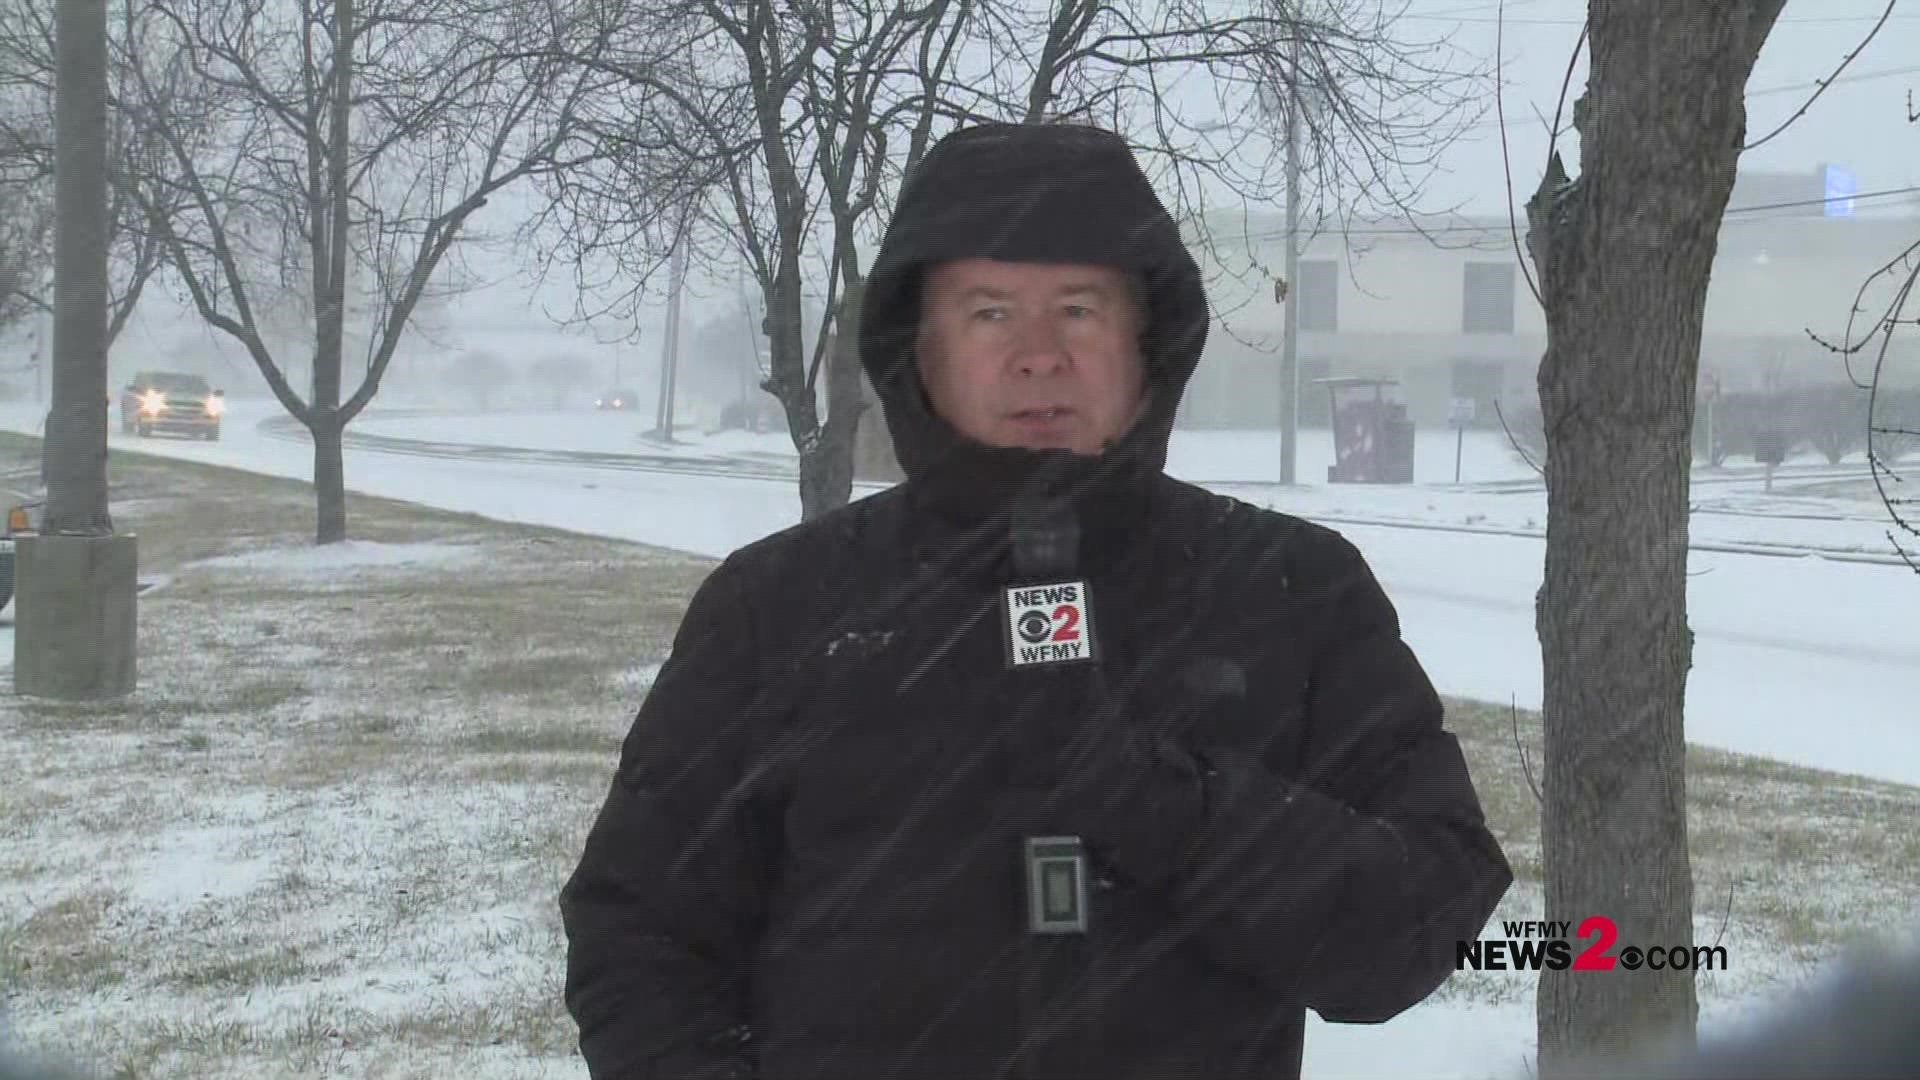 Eric Chilton gives us a look at snowy conditions in Greensboro Sunday morning.